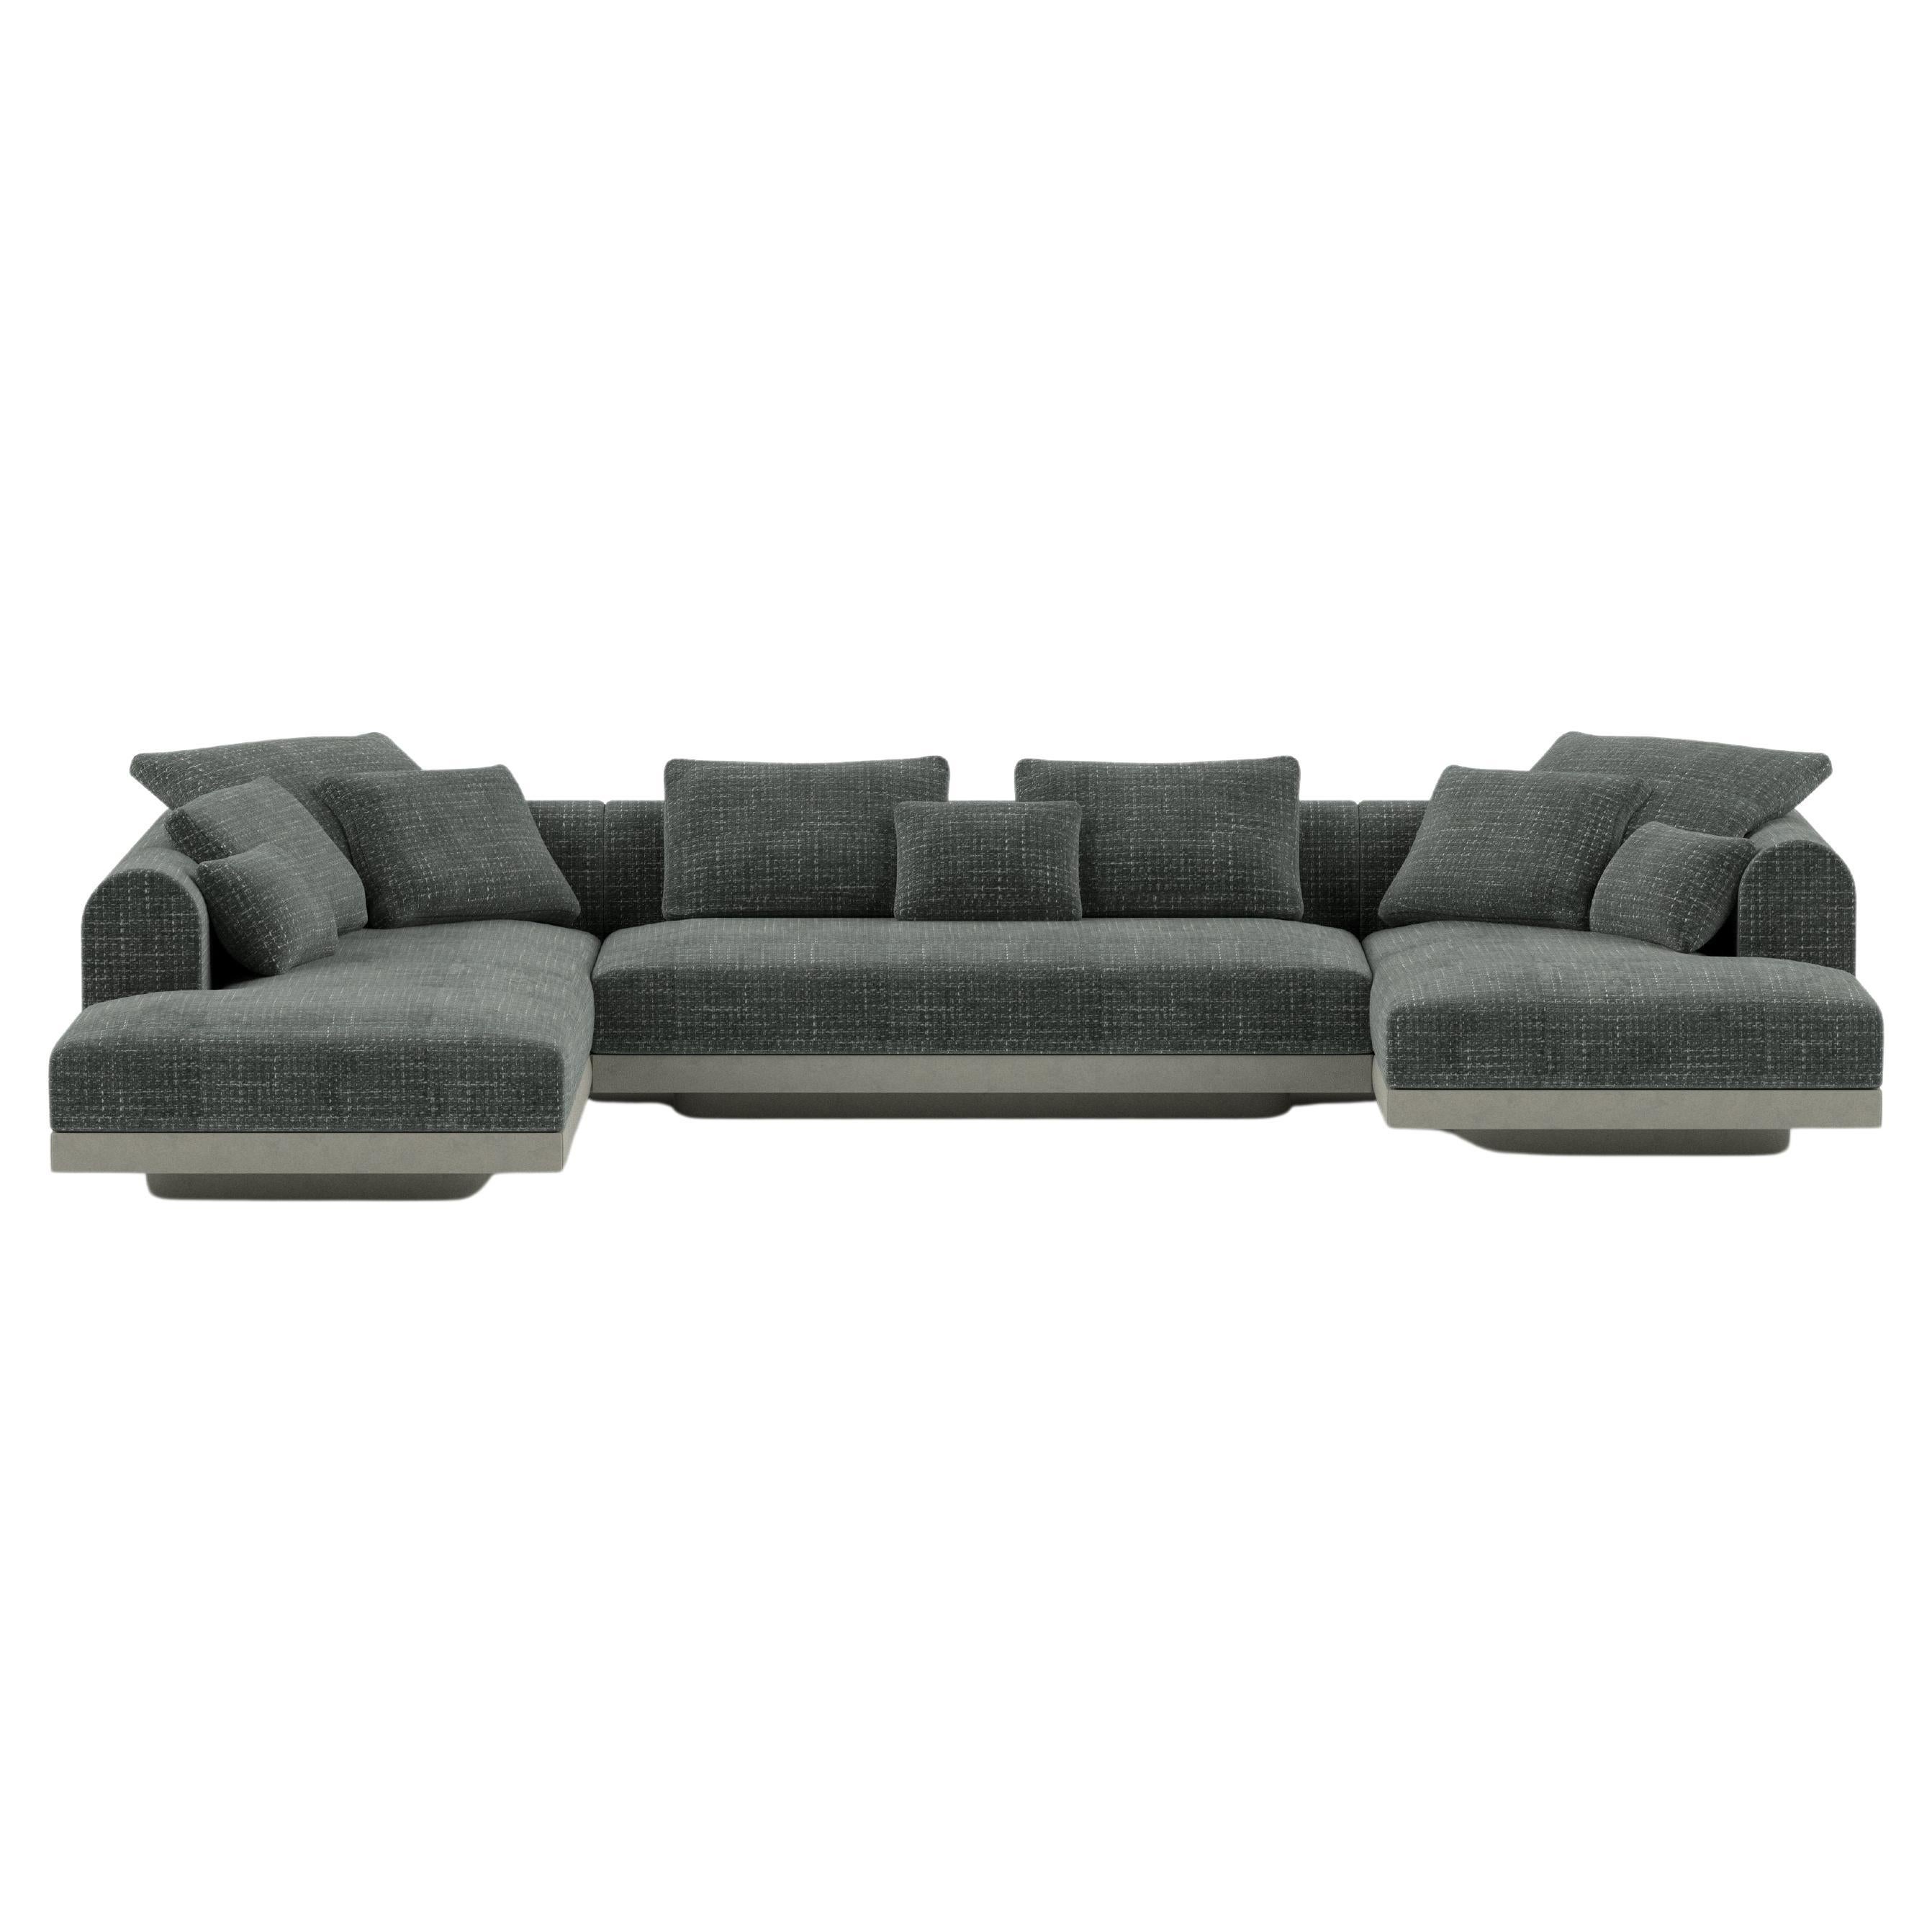 'Aqueduct' Contemporary Sofa by Poiat, Setup 4, Yang 95, HIgh Plinth For Sale